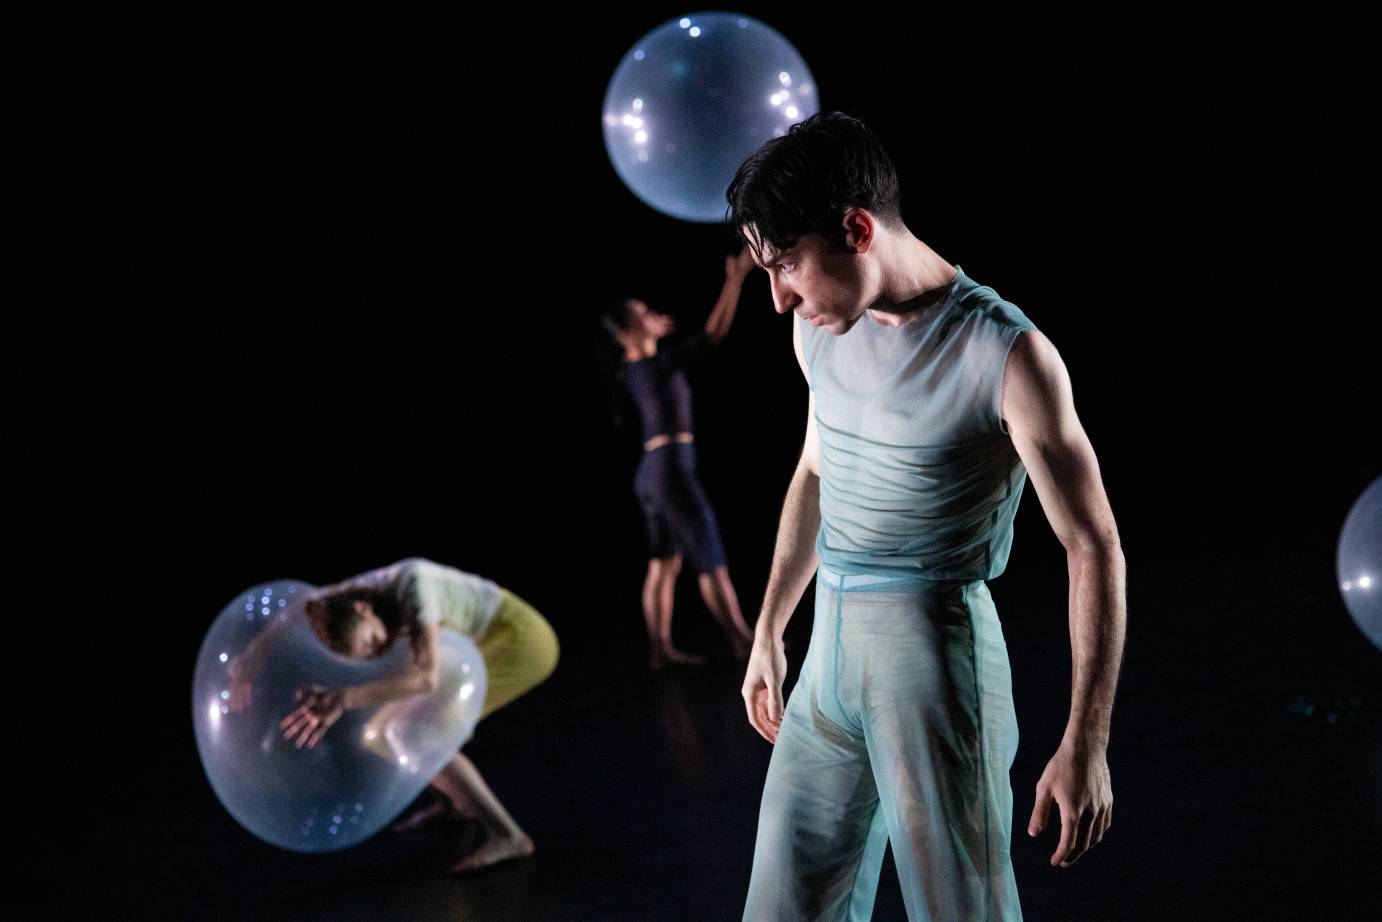 dancers in the background of this scene play with balloons  as  a male presenting figure in sheer green body hugging fabric looks on pensively 